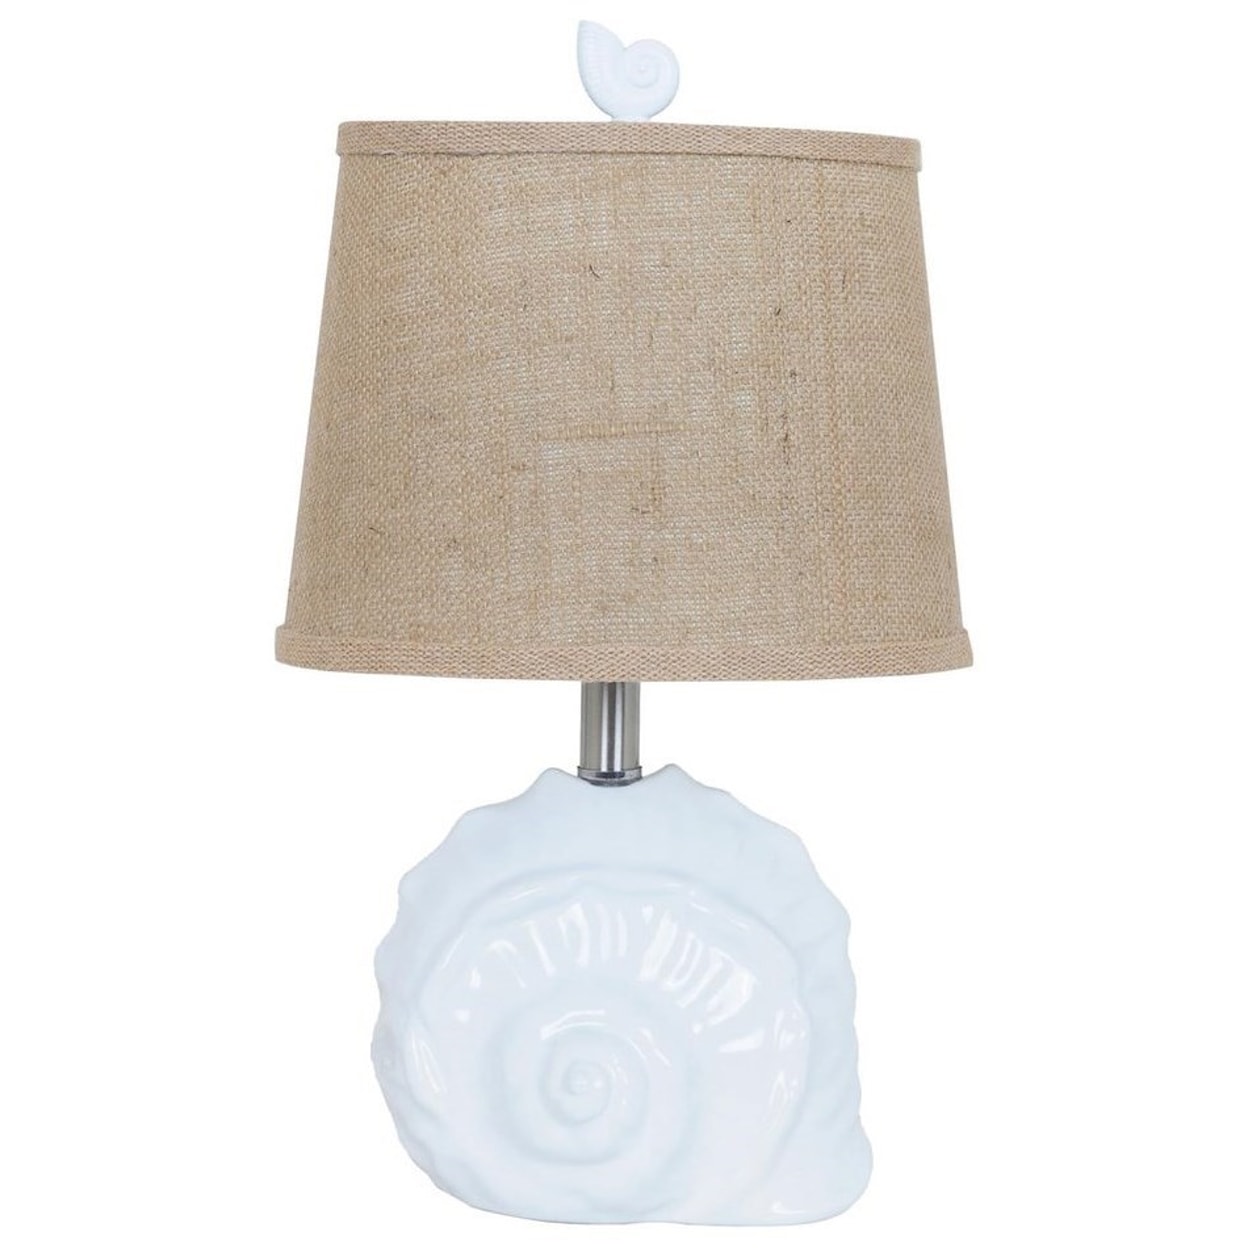 Crestview Collection Lighting Shell Accent Lamp